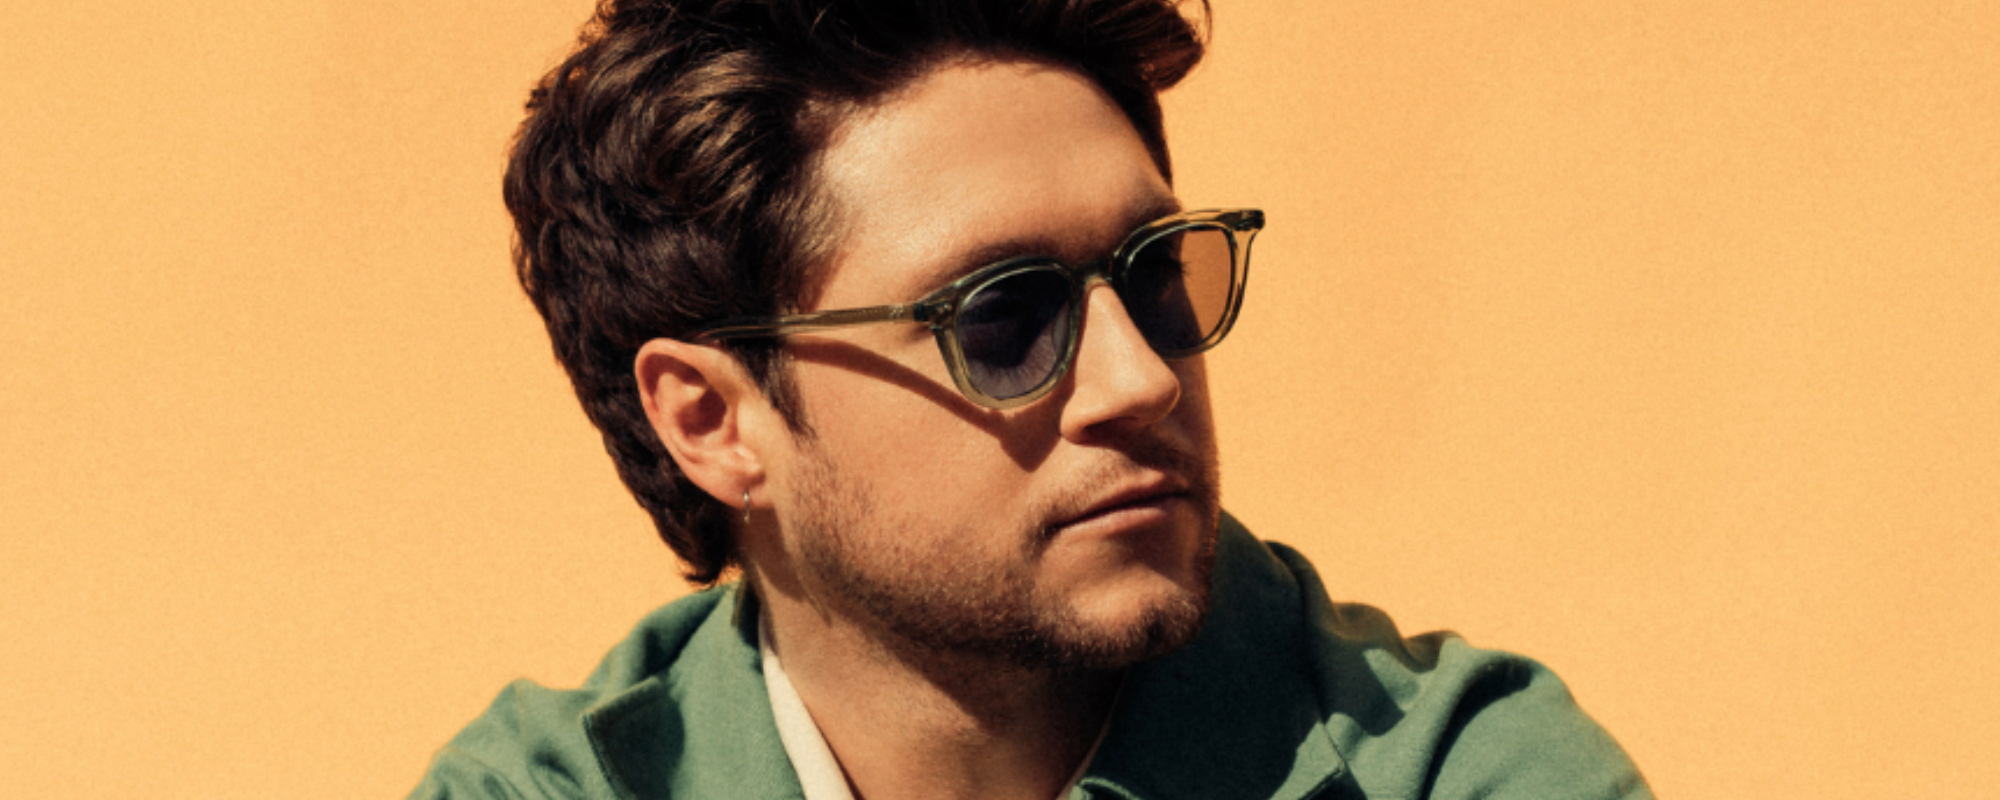 Niall Horan Talks Friendship with Blake Shelton: “We’ve Got a Lot In Common”